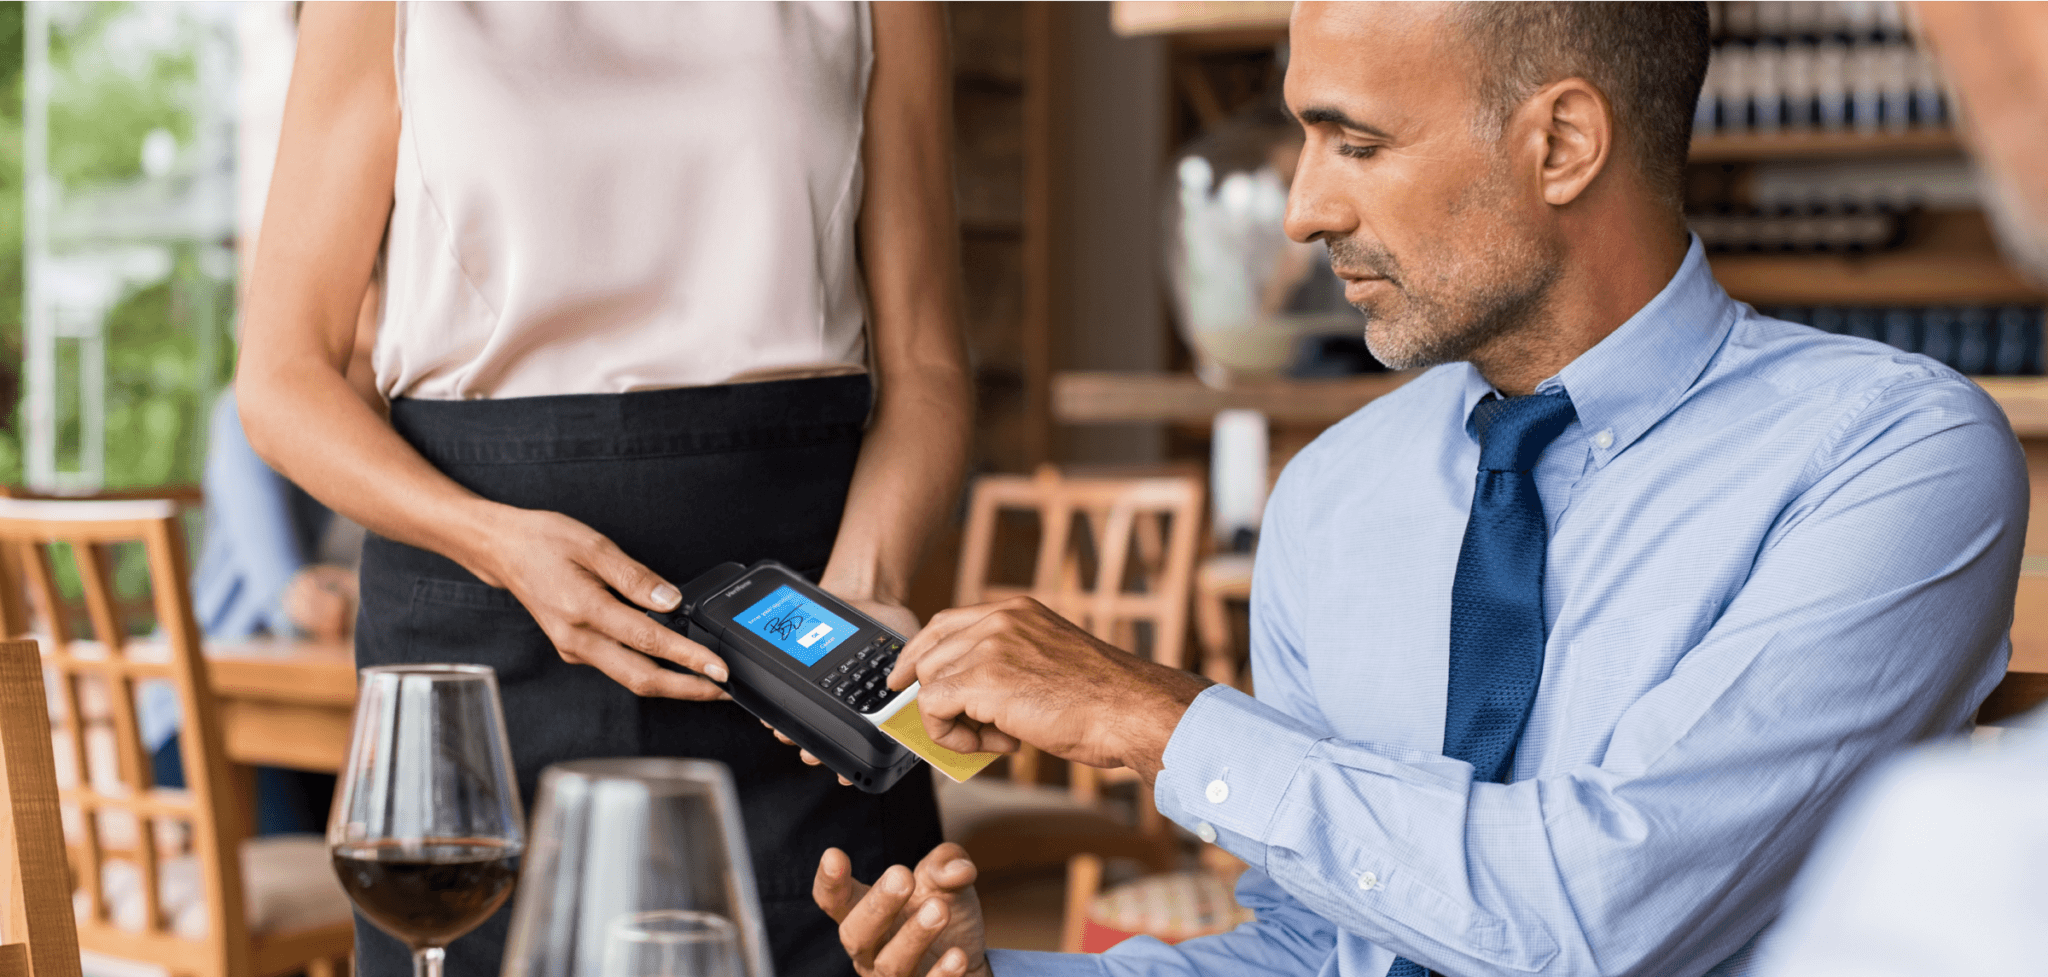 Man using mPOS Handheld Case to complete payment at a restaurant.